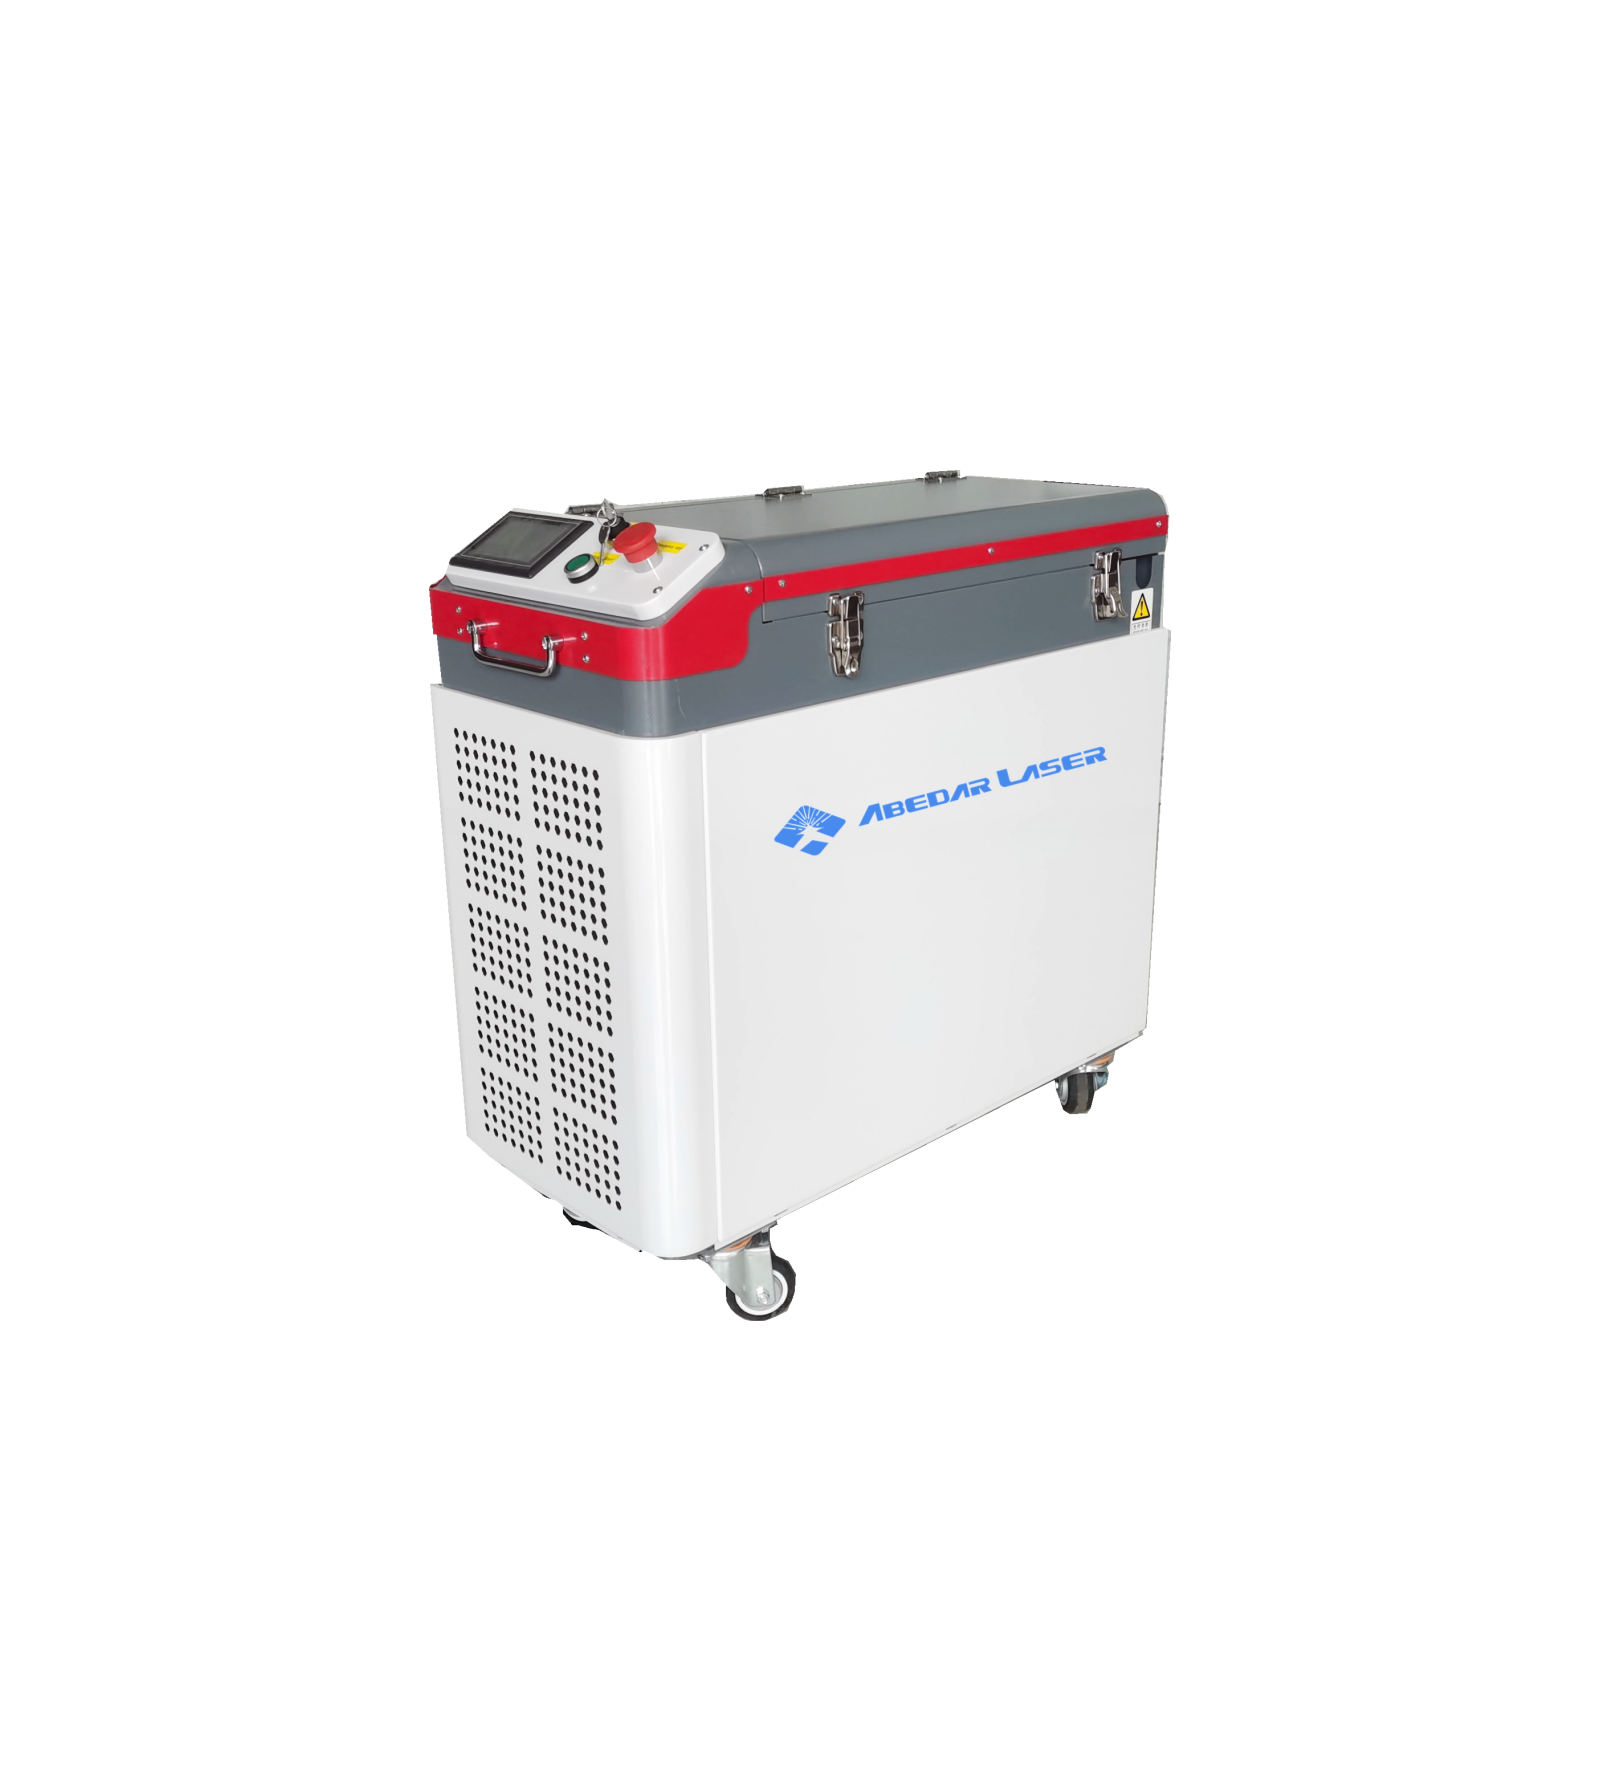 Hand Held Fiber Laser Cleaning Machine Metal Rust Removal Oxide